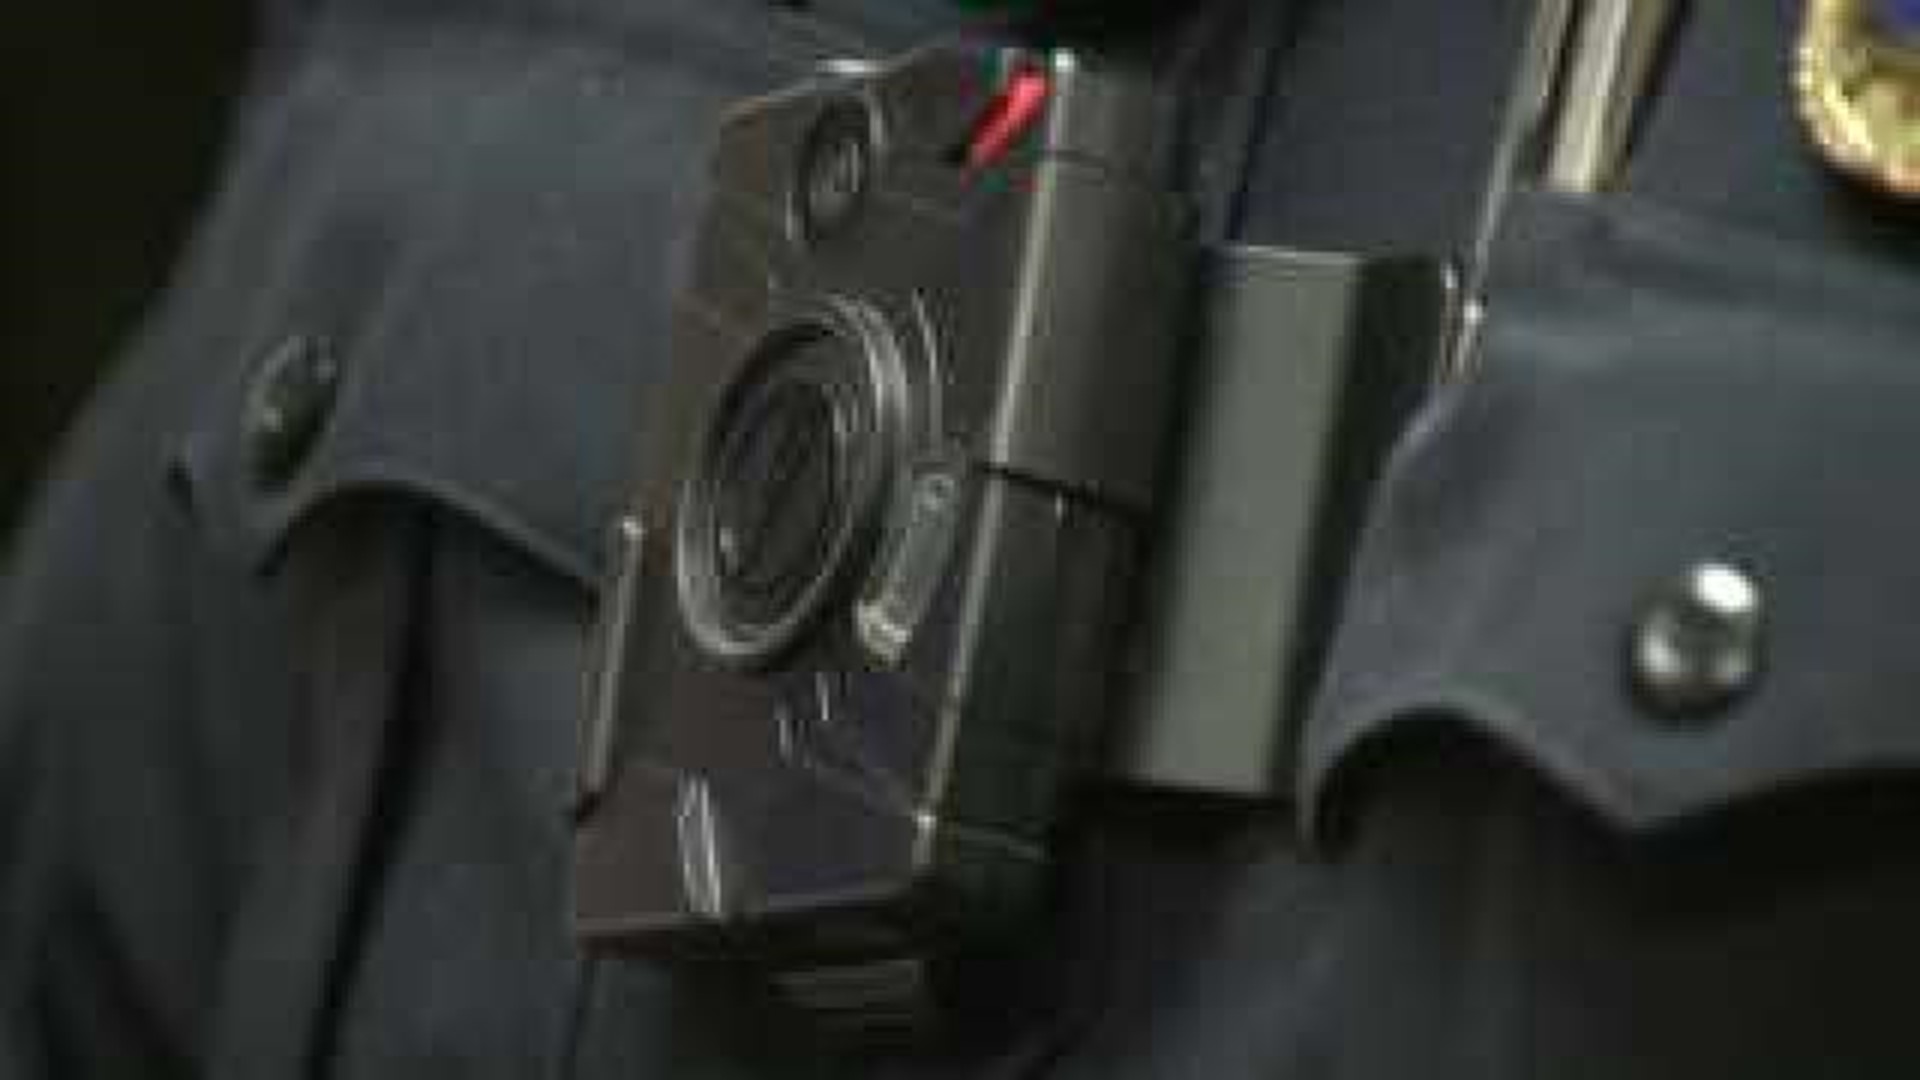 Hampton police required to use body cameras